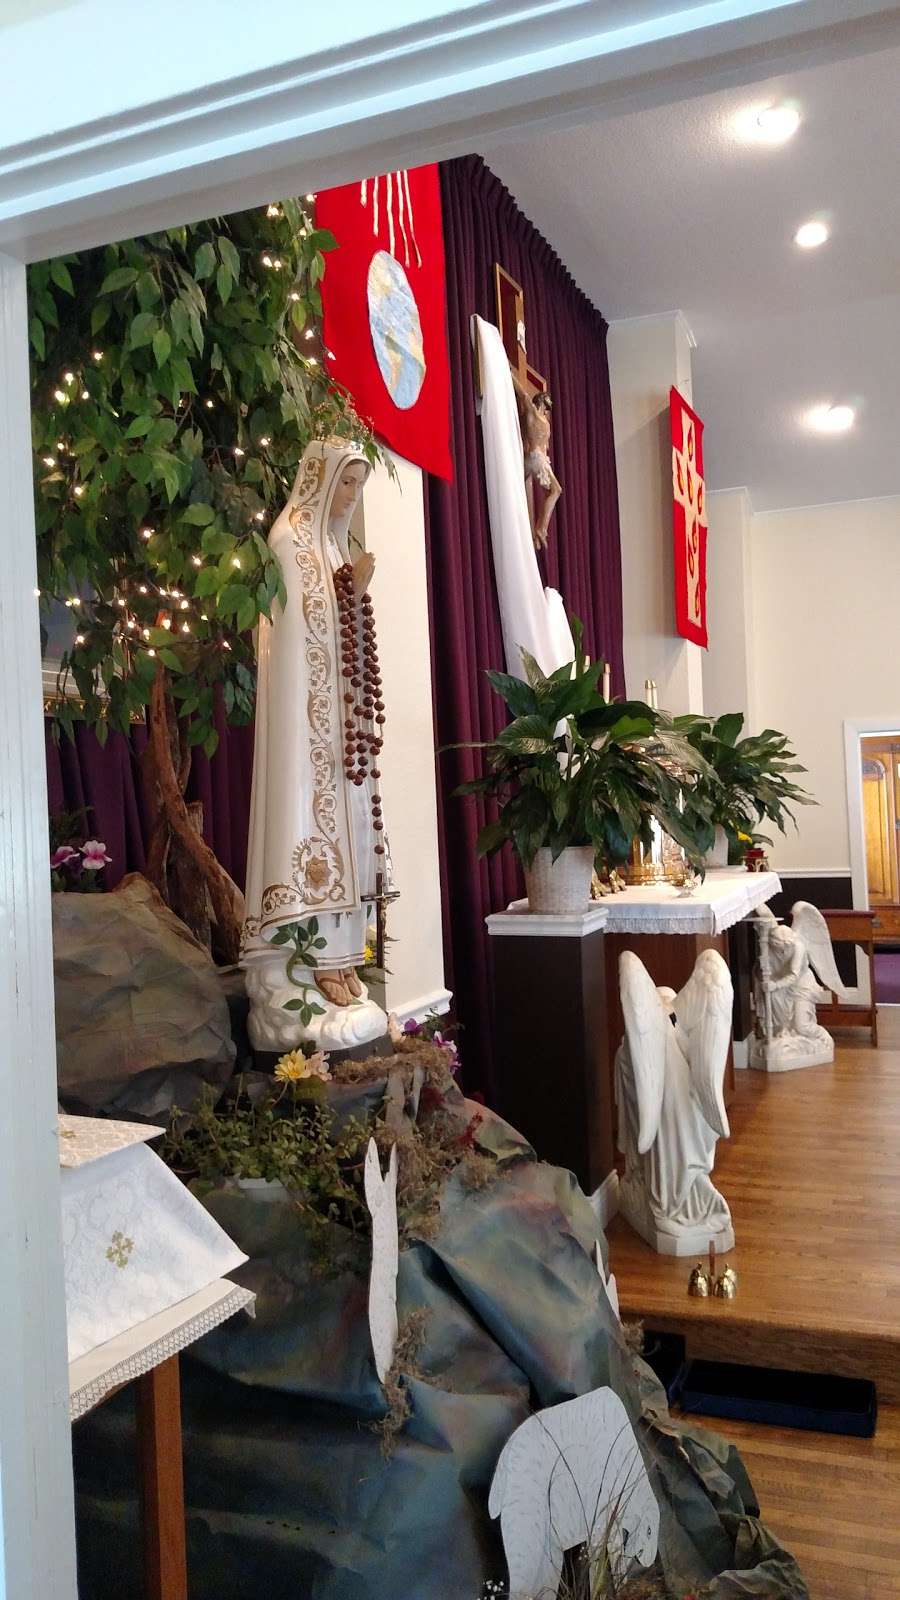 Our Lady of Mt Carmel Convent | 506 1/2 S East Ave, Wharton, TX 77488 | Phone: (979) 532-3215